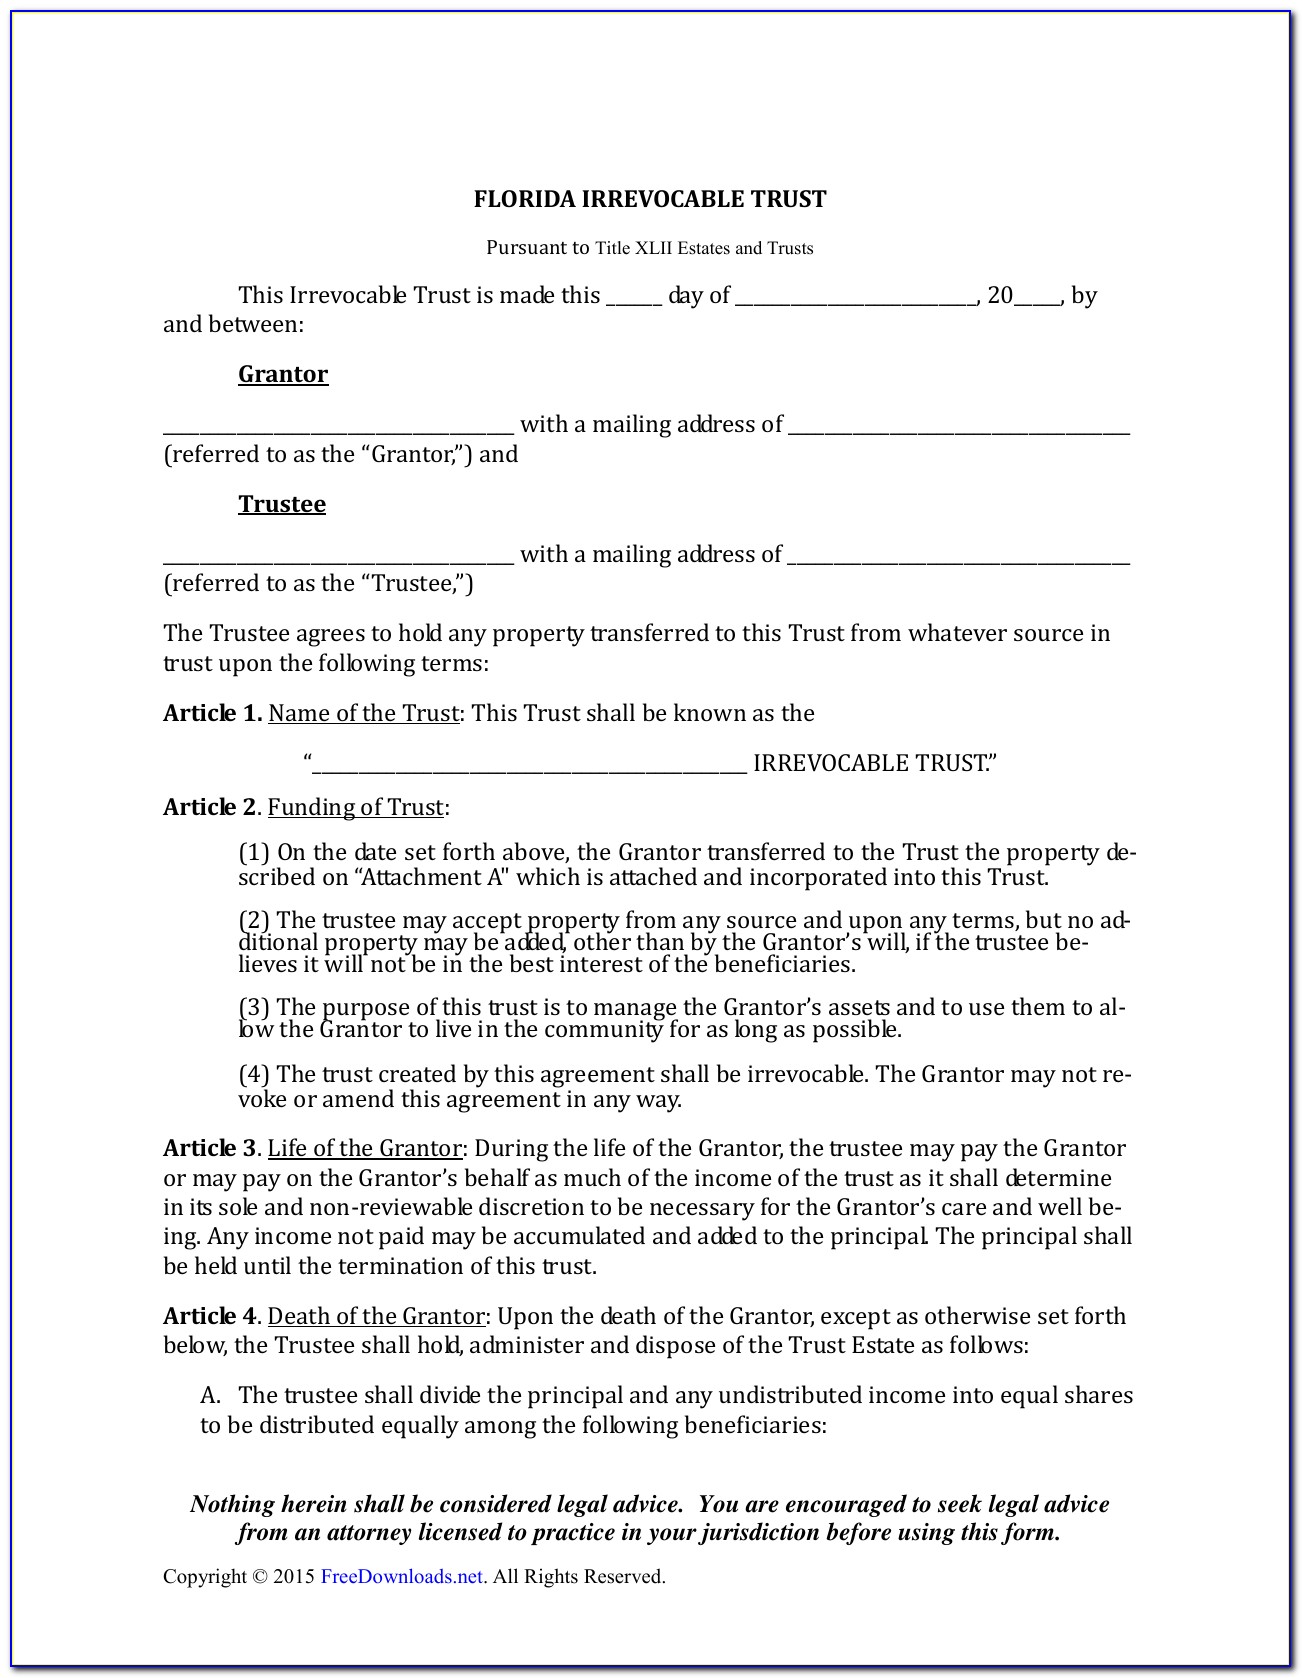 Florida Irrevocable Trust Form